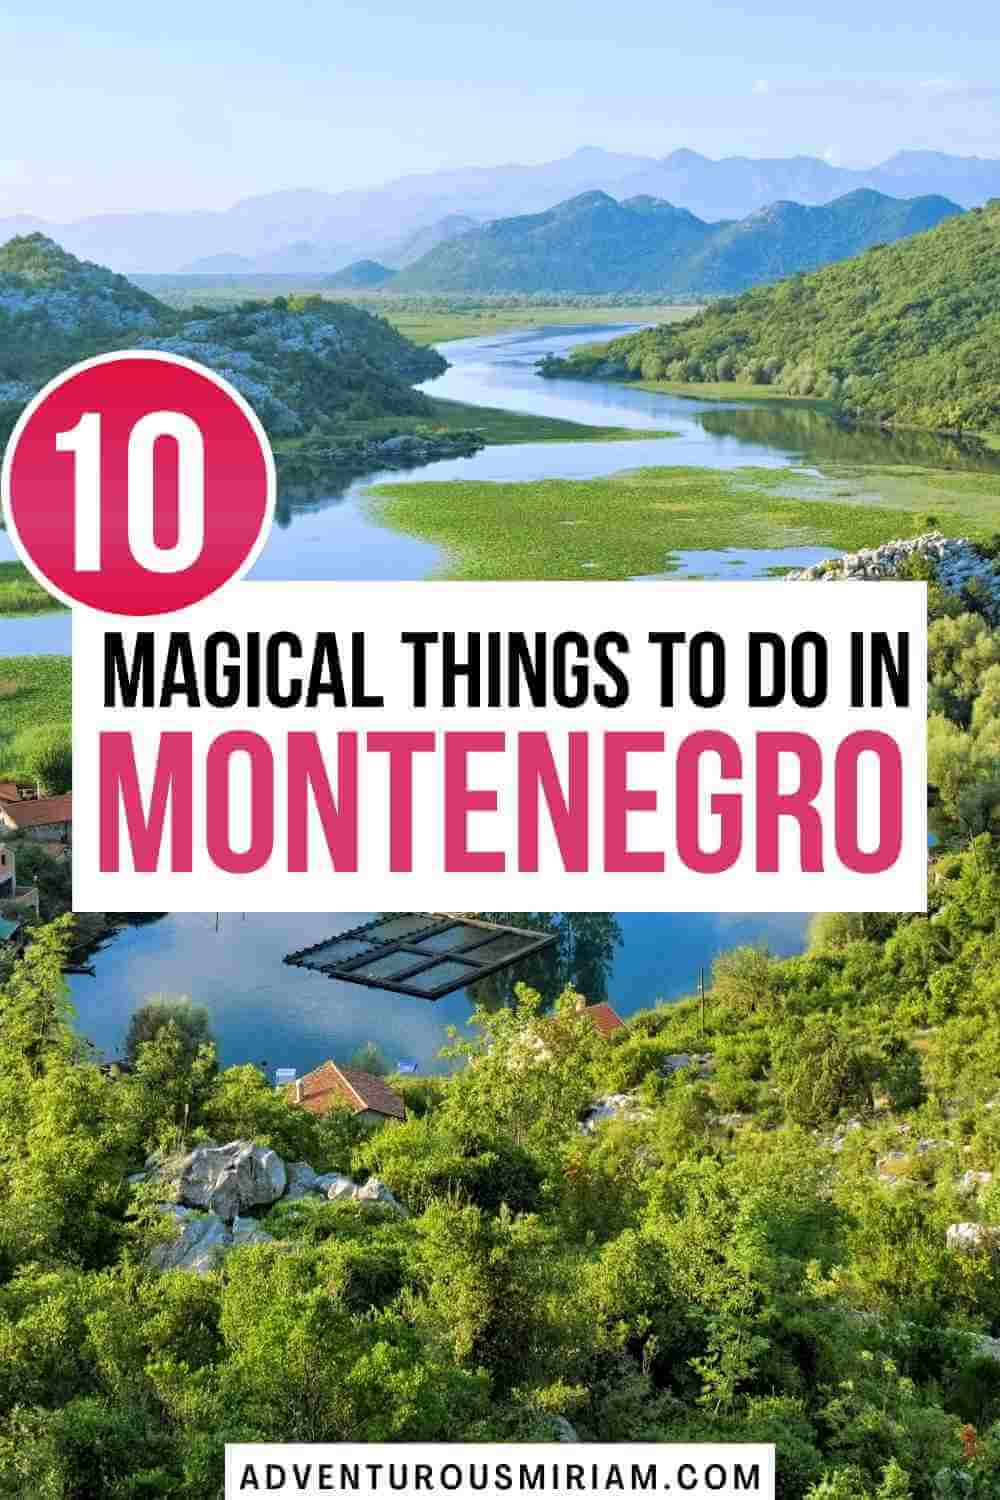 Looking for things to do in Montenegro? It's a small country, but what it lacks in size, it makes up for in beauty. Montenegro is one of the youngest countries in the world and tourism hasn’t entirely made its way there, so now is the best time to visit. Here are 10 fun and adventurous things to do in Montenegro.